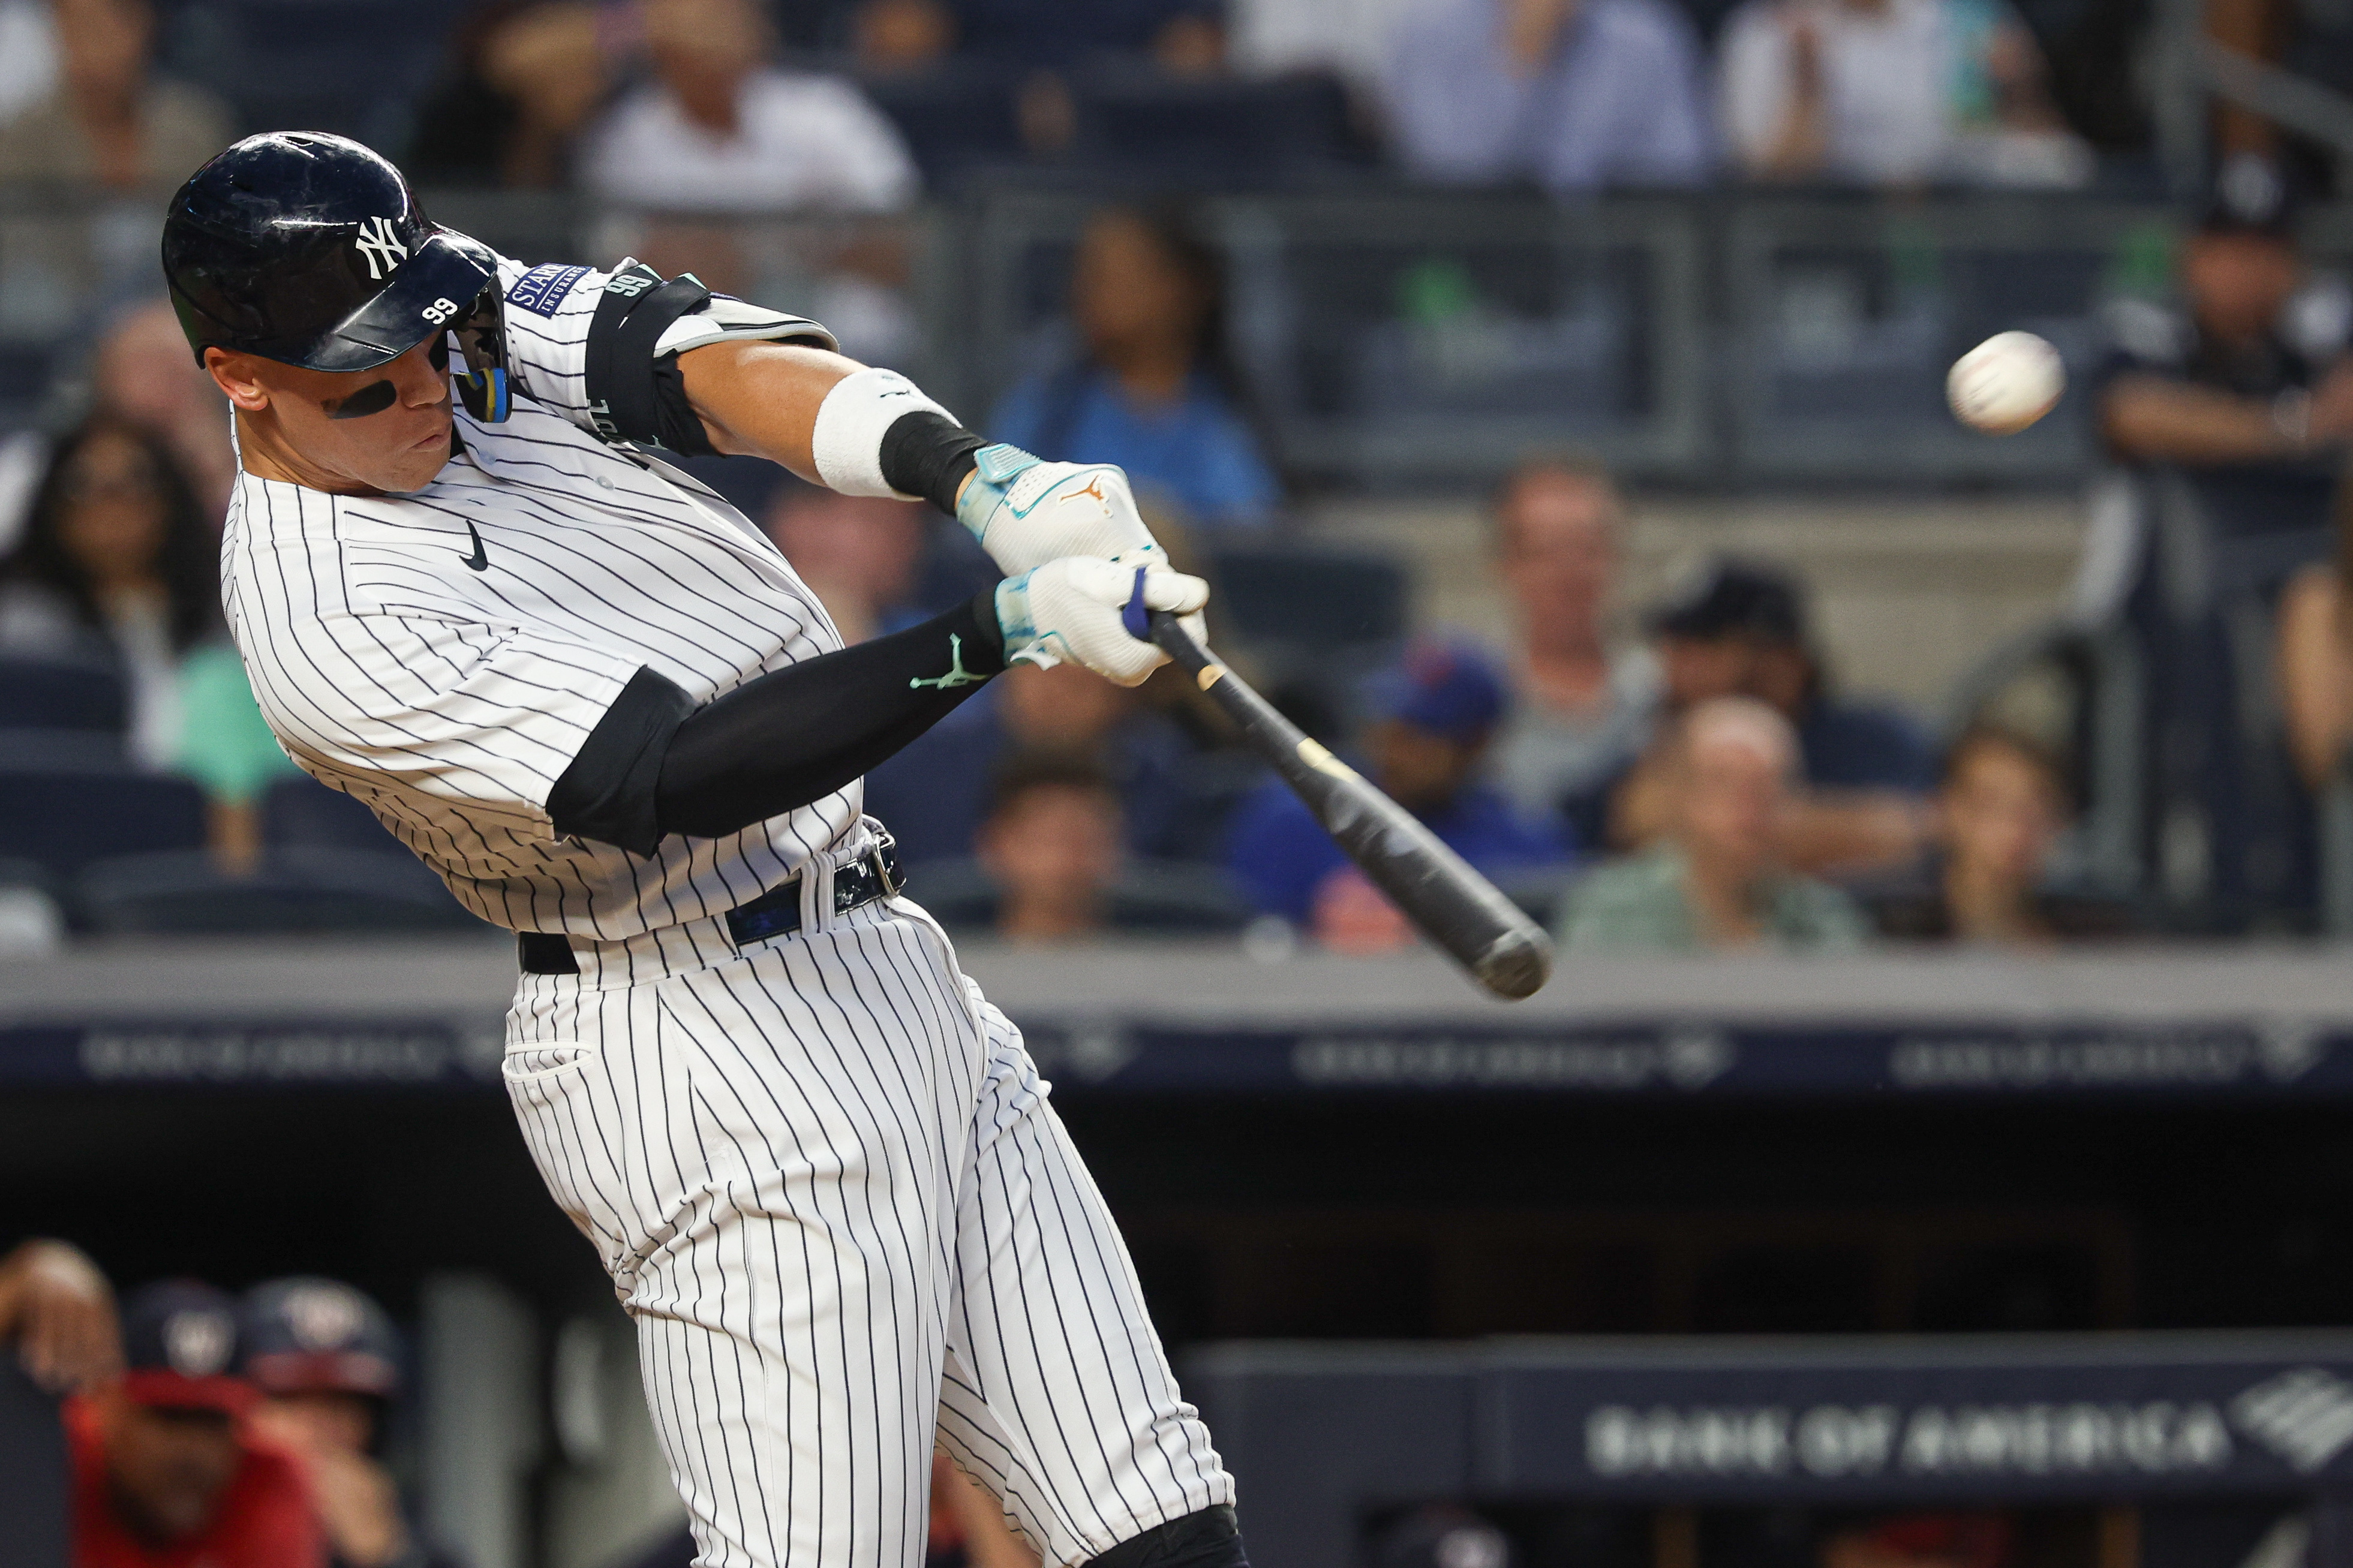 New York Yankees: Aaron Judge removed from game because turf